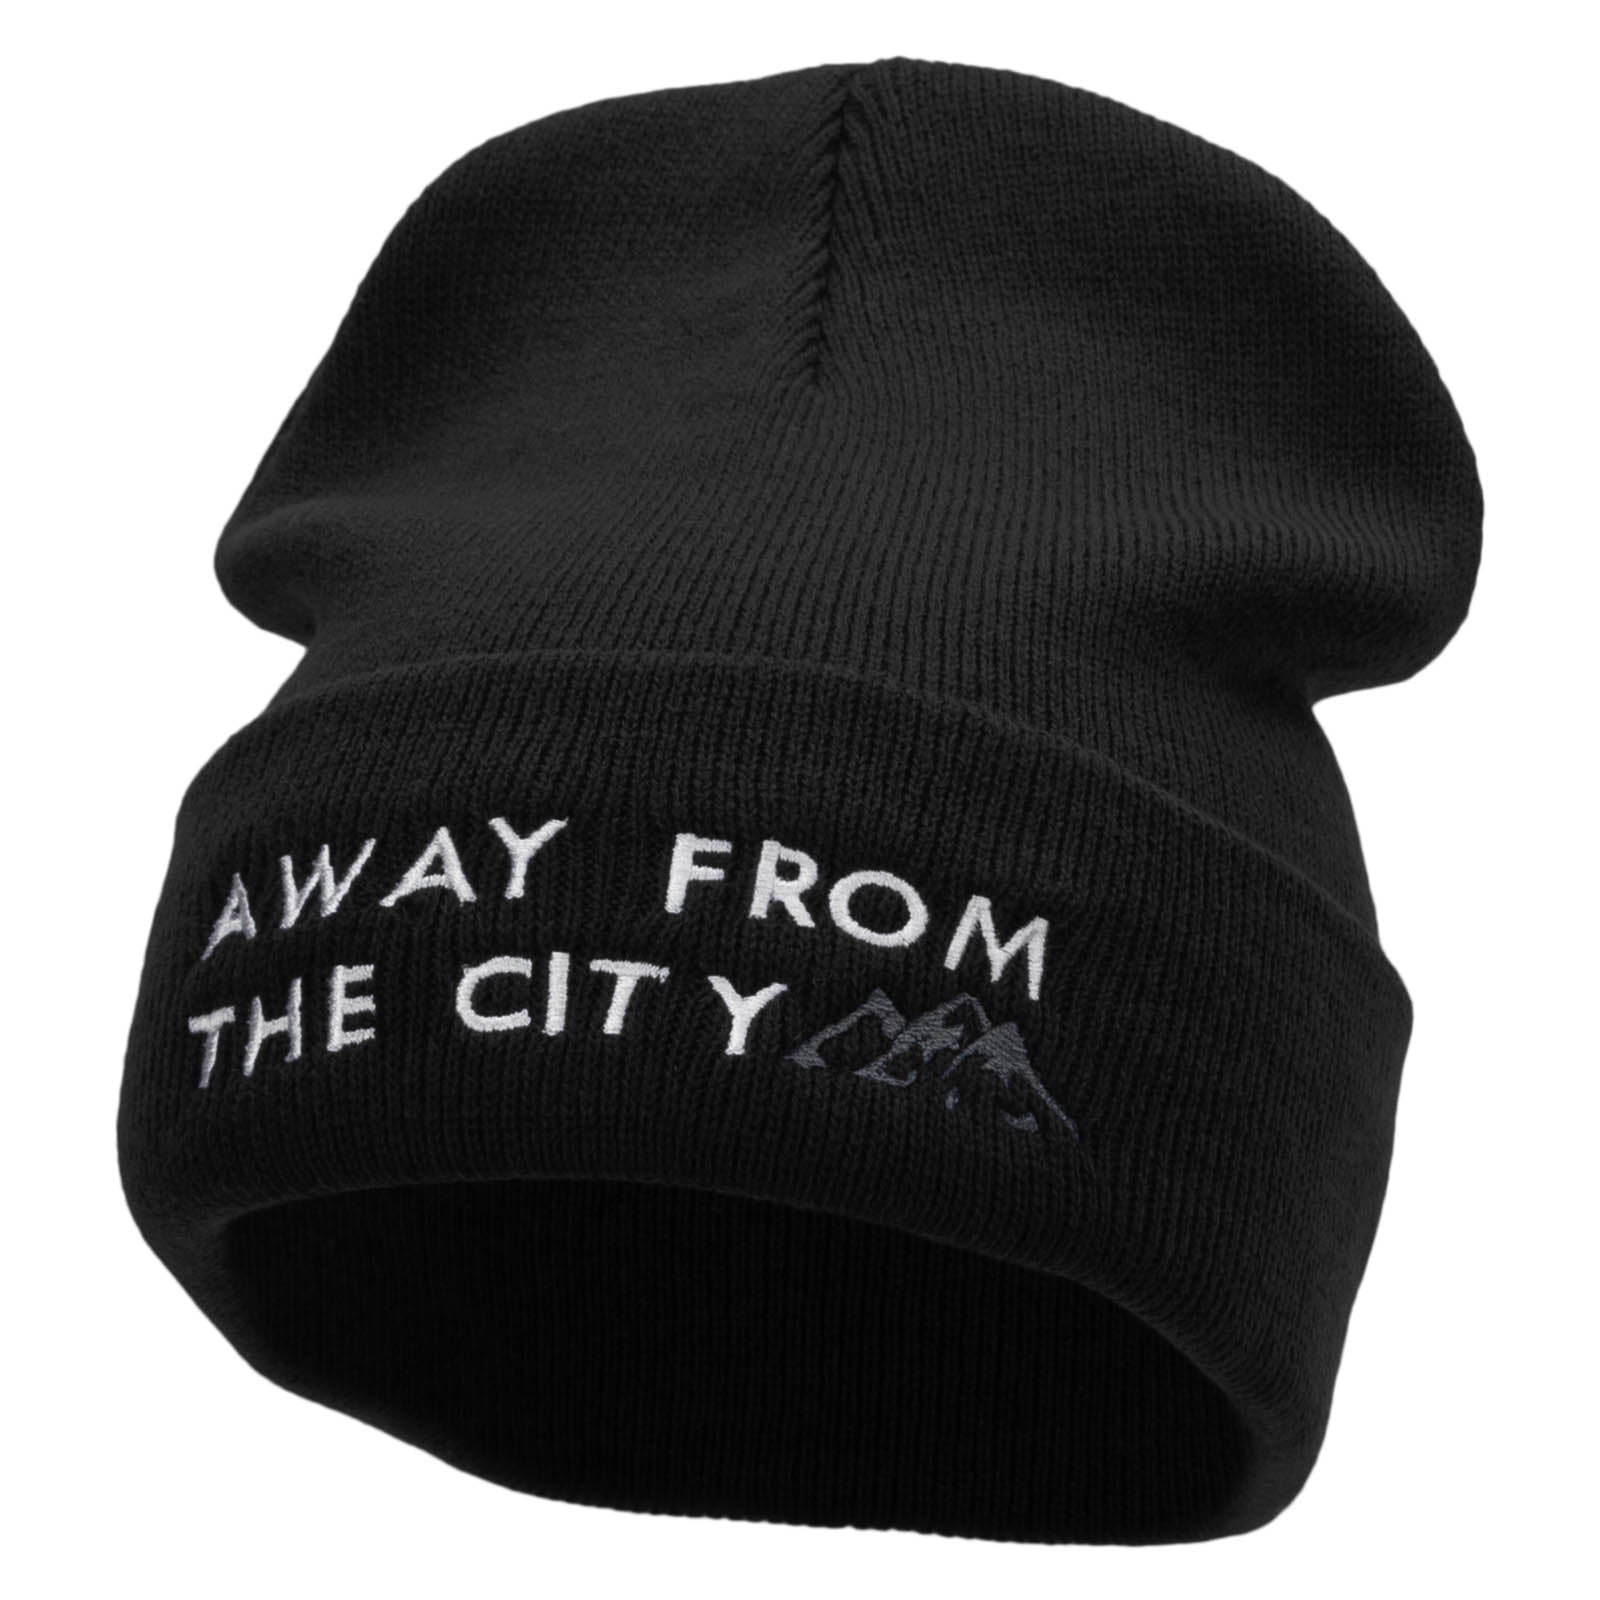 Away From The City Embroidered 12 Inch Long Knitted Beanie - Black OSFM